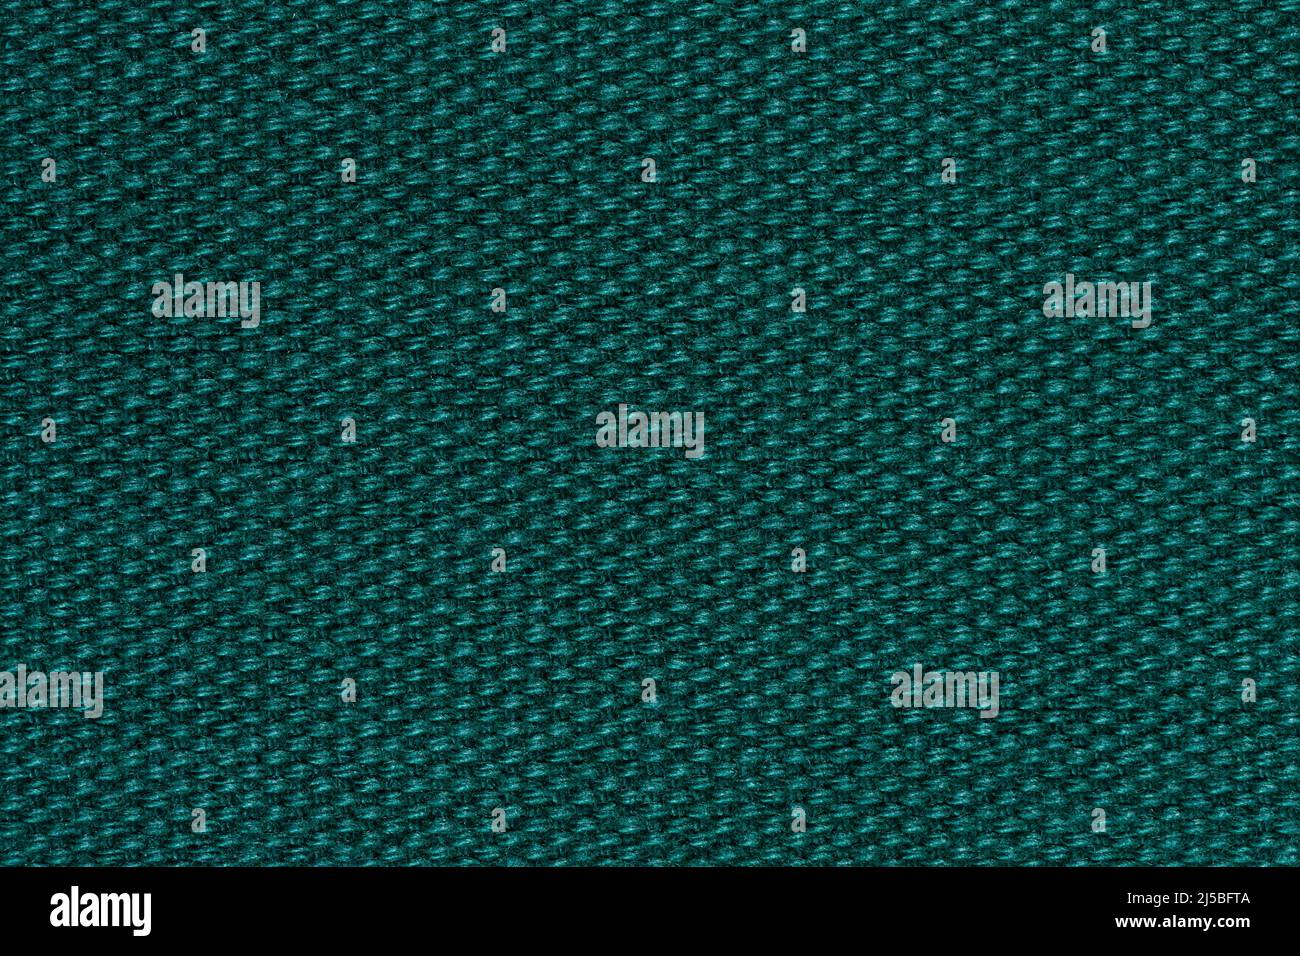 Stylish material texture in admirable dark green colour. Stock Photo